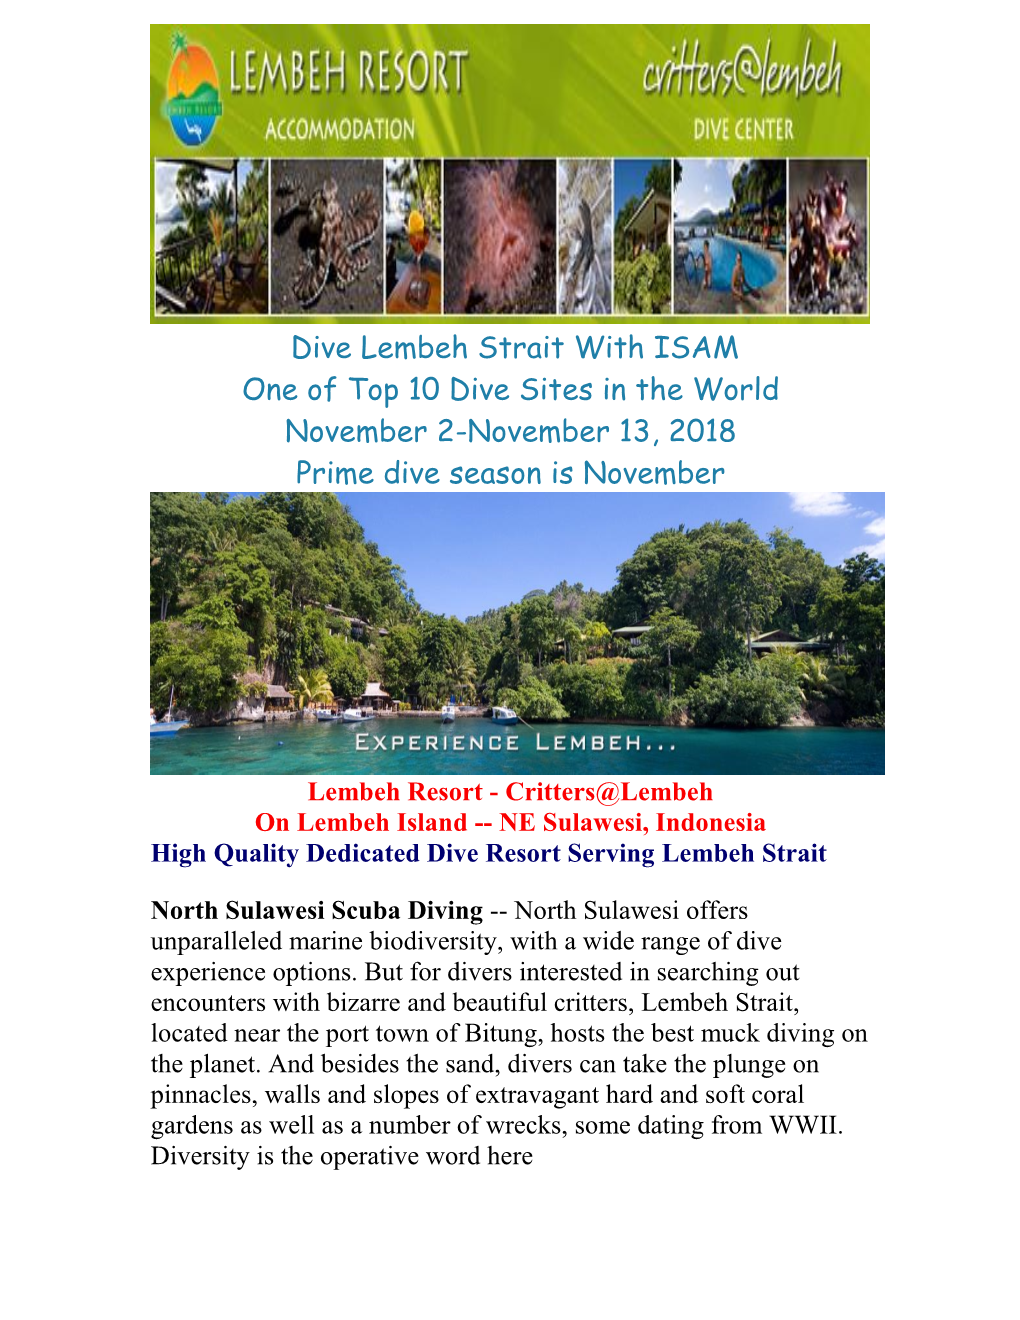 Dive Lembeh Strait with ISAM One of Top 10 Dive Sites in the World November 2-November 13, 2018 Prime Dive Season Is November